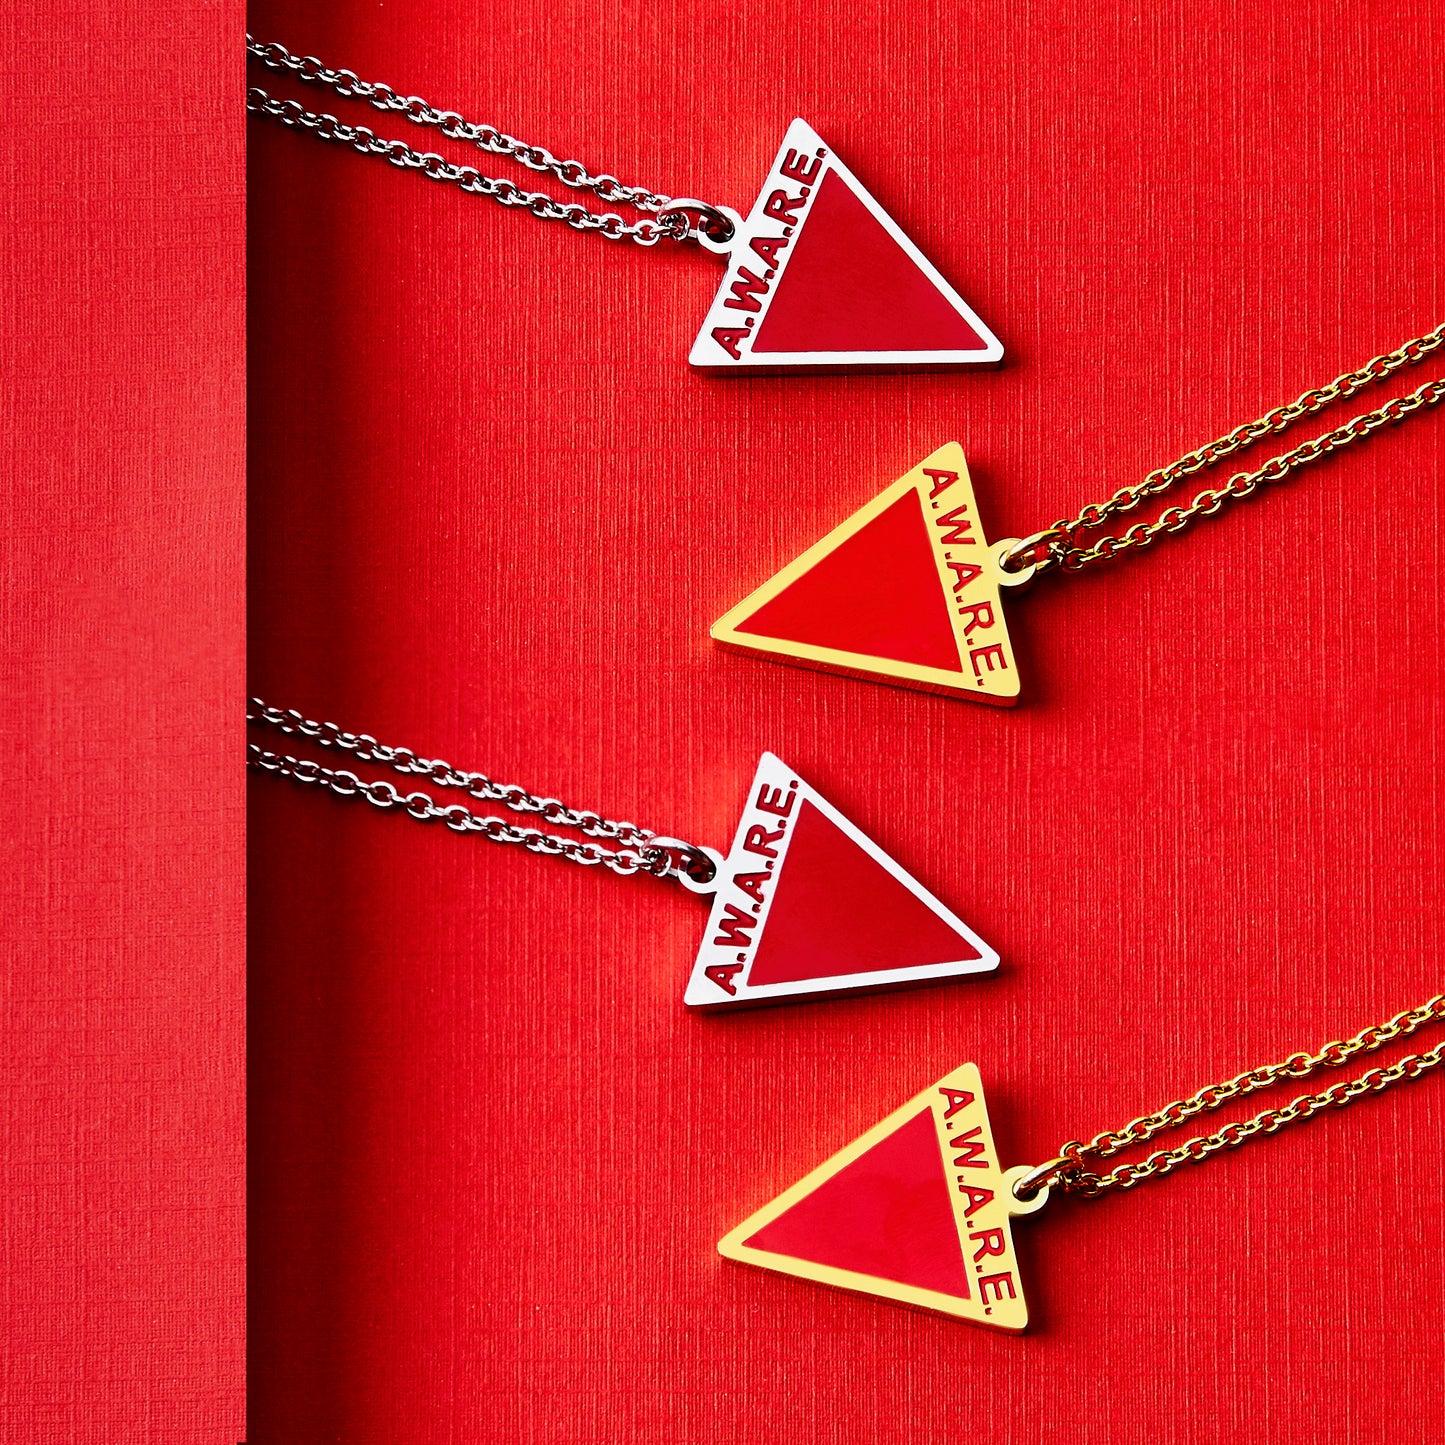 Red AWARE Necklaces